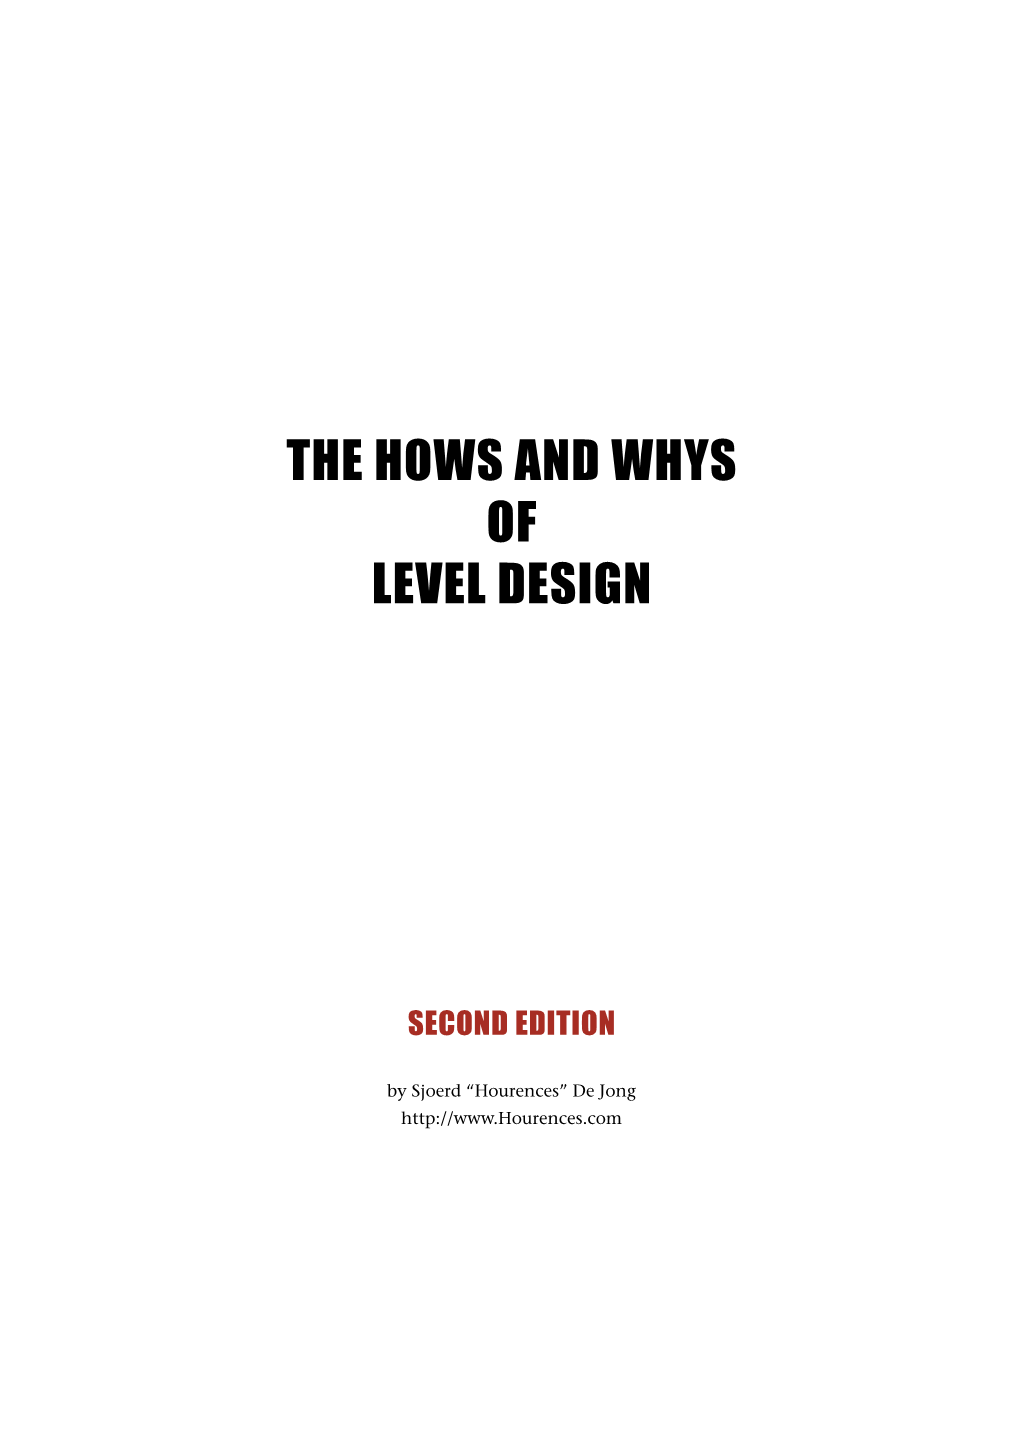 The Hows and Whys of Level Design